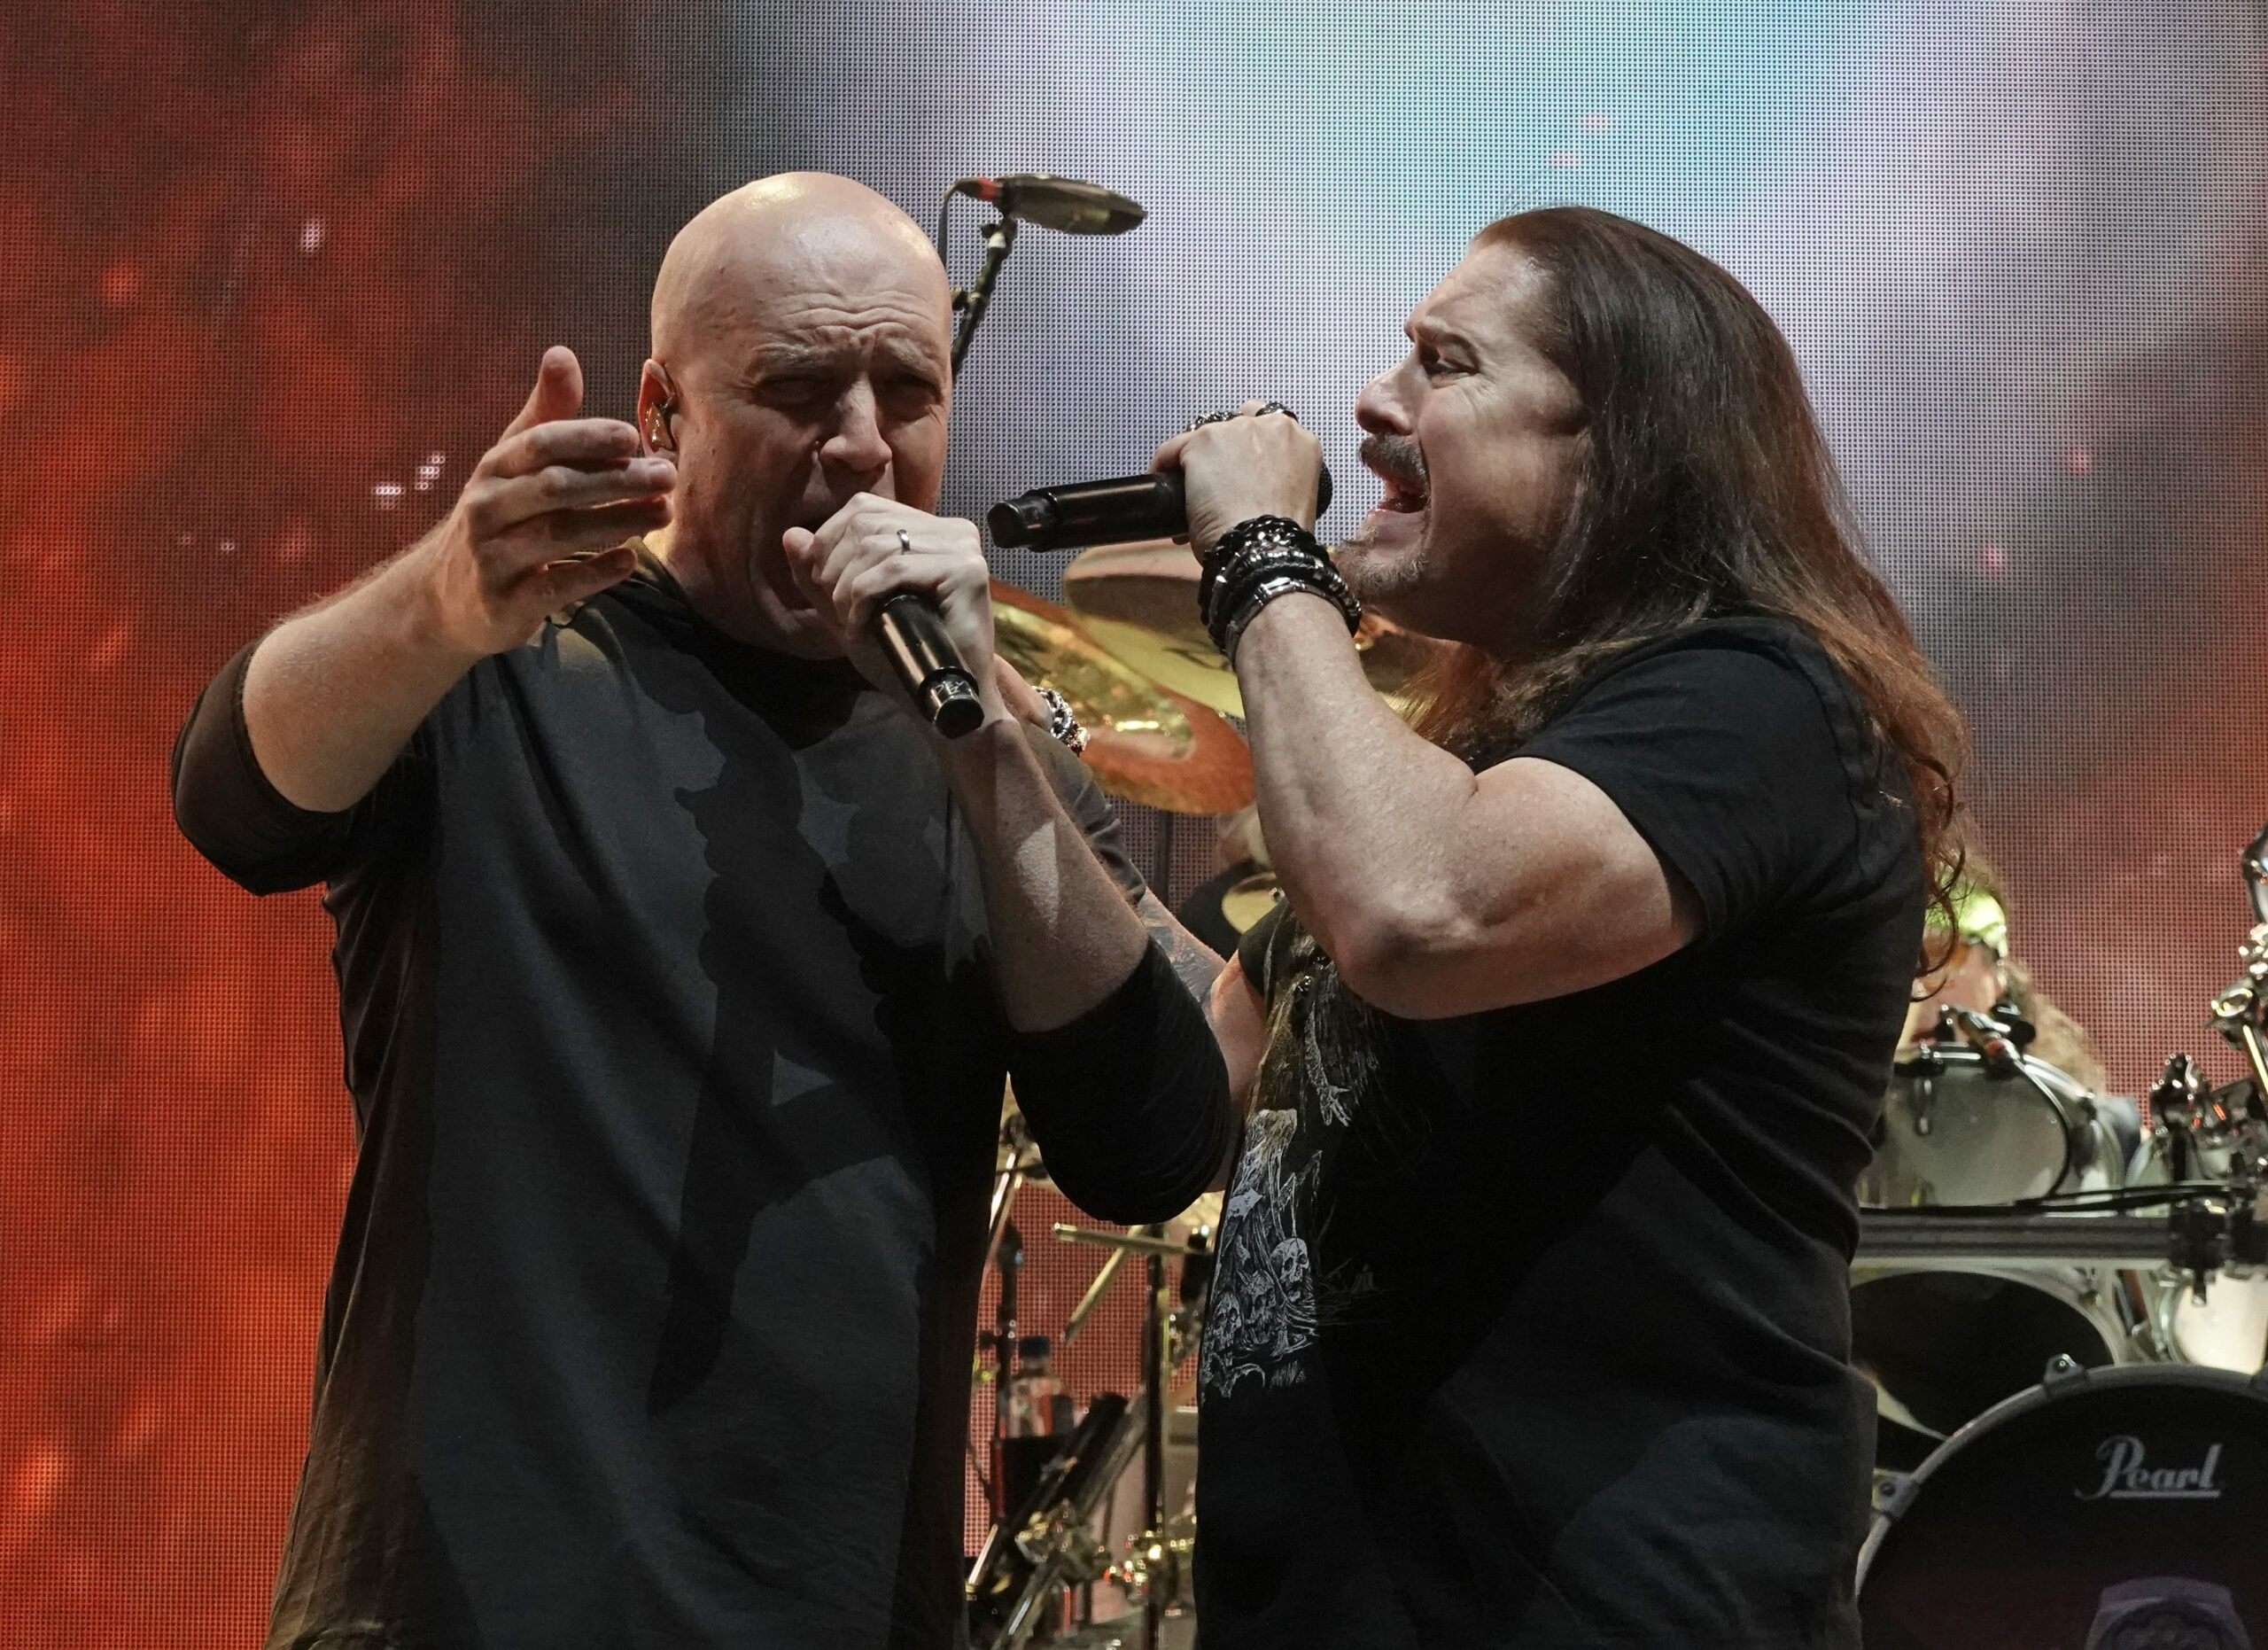 Concert Review: Dreamsonic 2023 with Dream Theater, Devin Townsend 